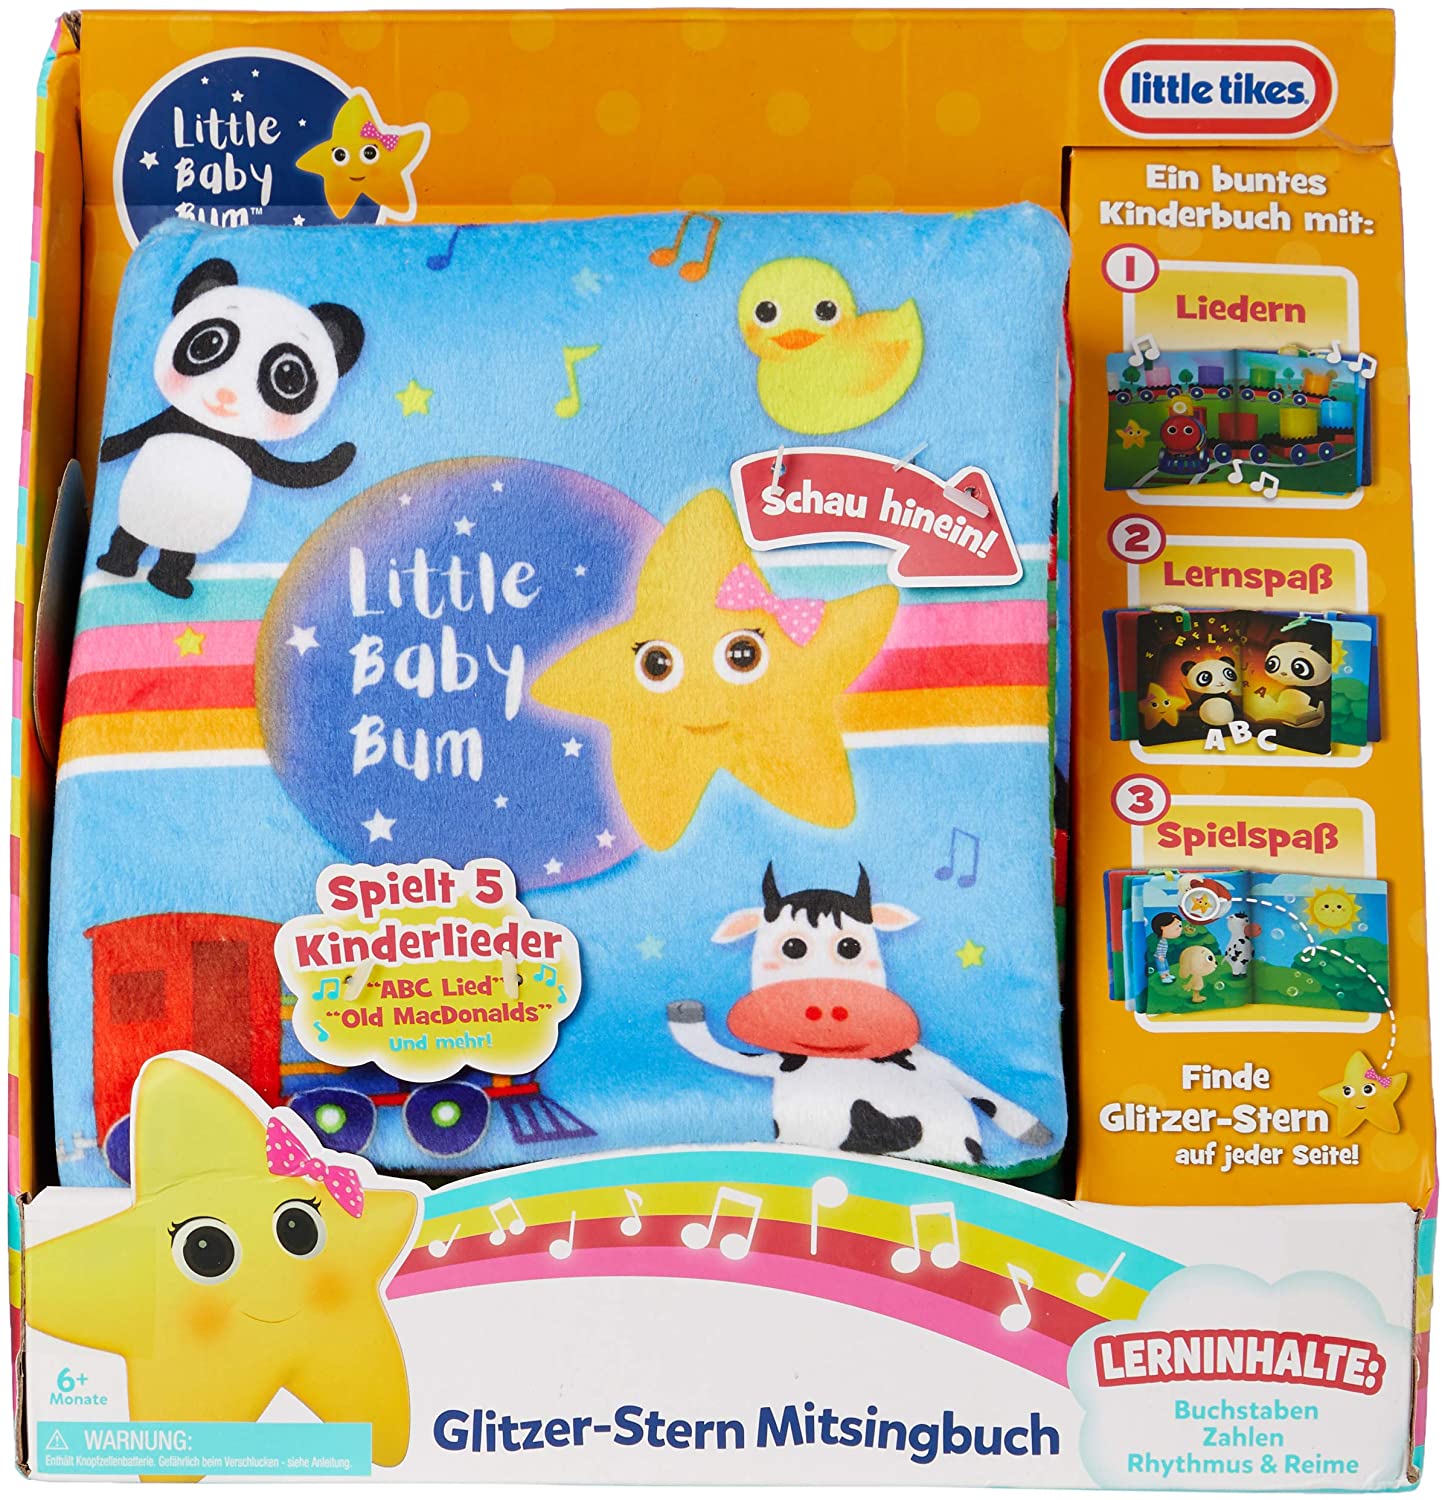 Little Tikes Little Baby Bum Singing Storybook $5.90 + Free Shipping w/ Amazon Prime or Orders $25+